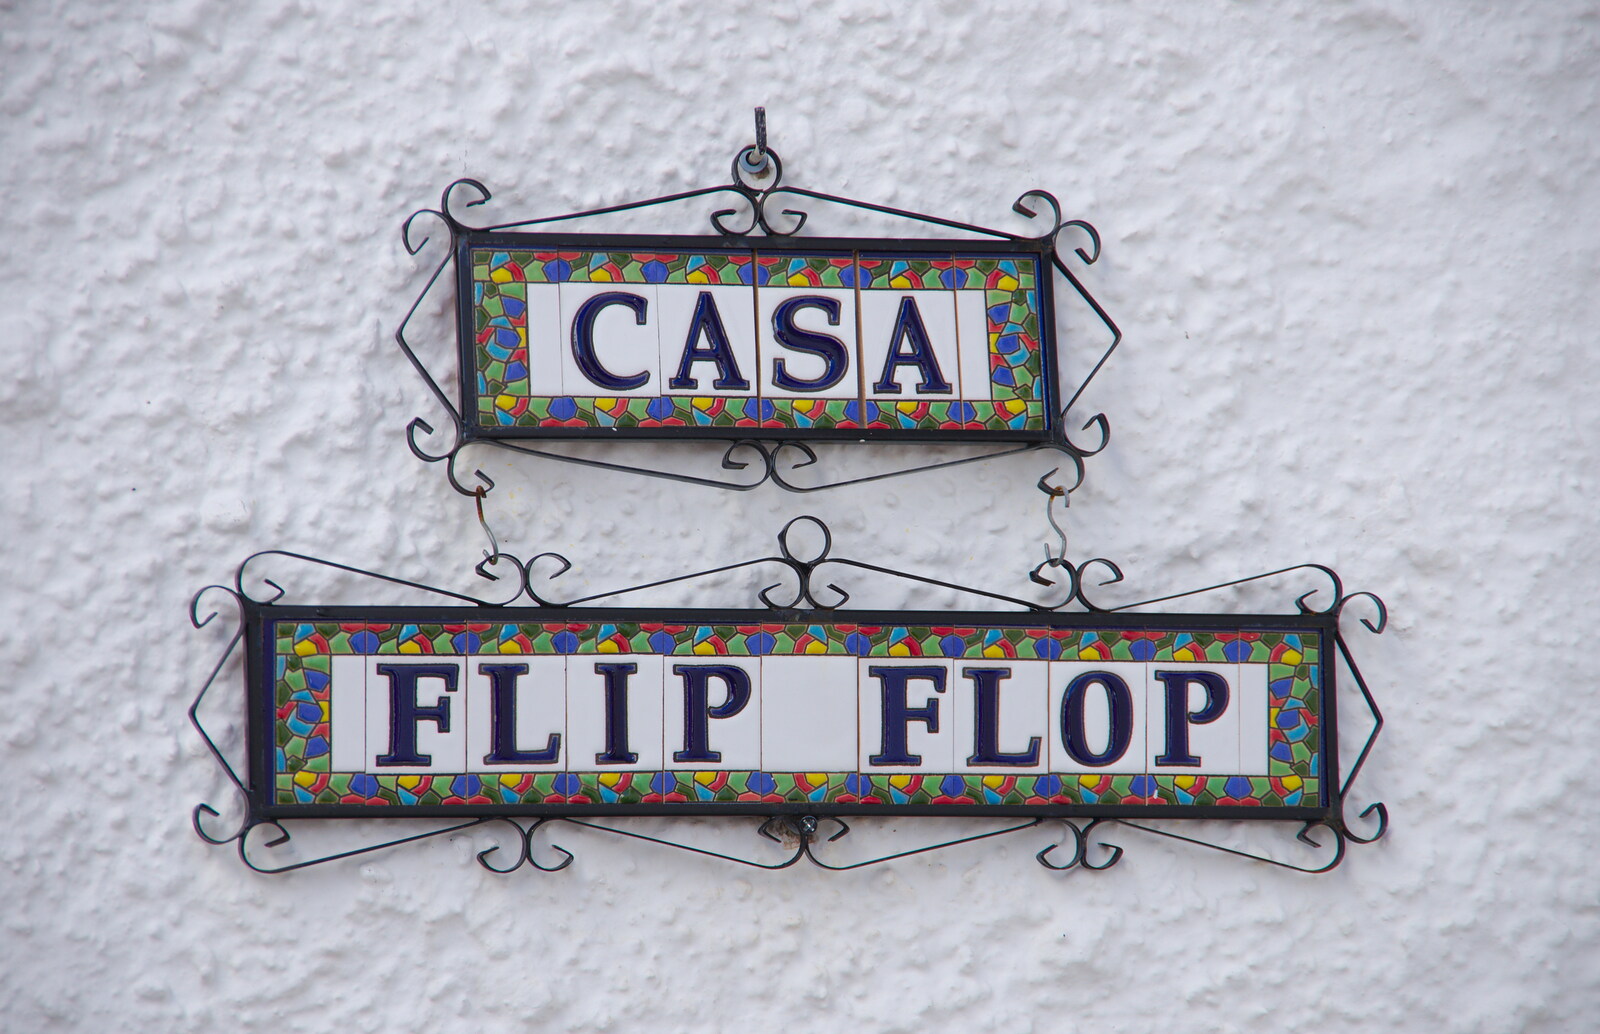 We pass the entertainingly-named 'Casa Flip Flop' from A Holiday in Nerja, Andalusia, Spain - 15th April 2019